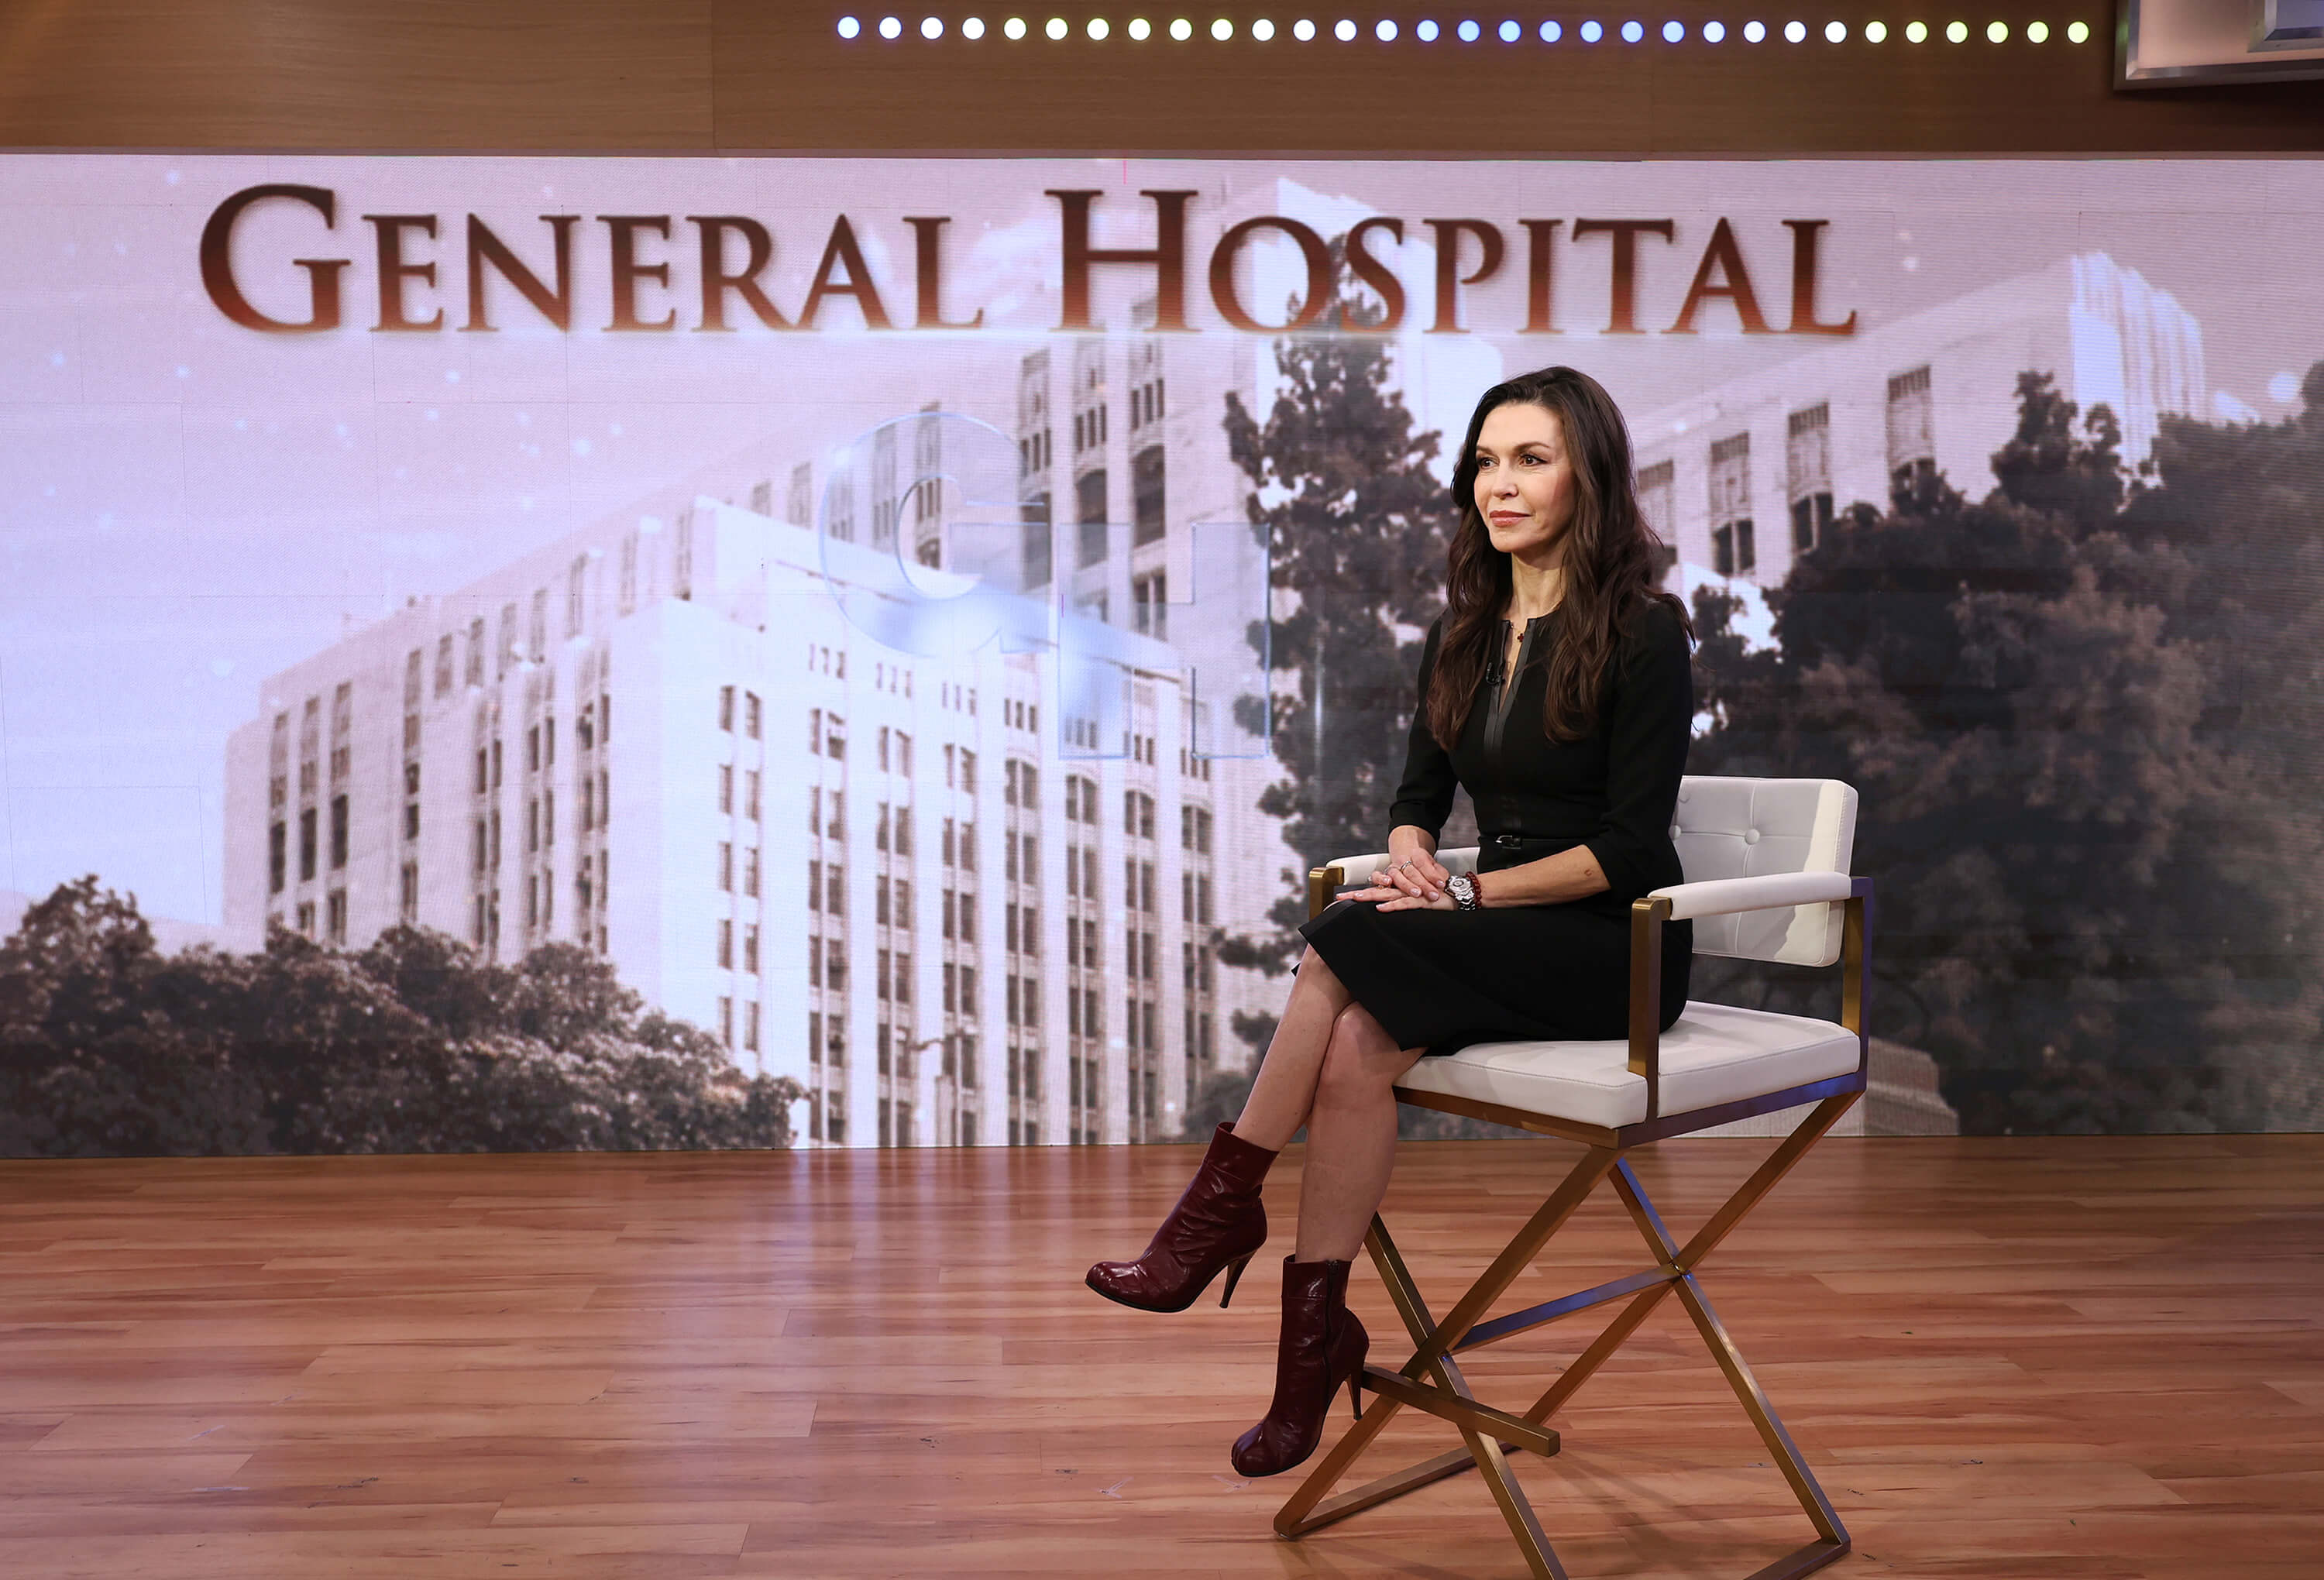 'General Hospital' star Finola Hughes sitting on the set of 'Good Morning America' to discuss the ABC soap opera's 60th anniversary.